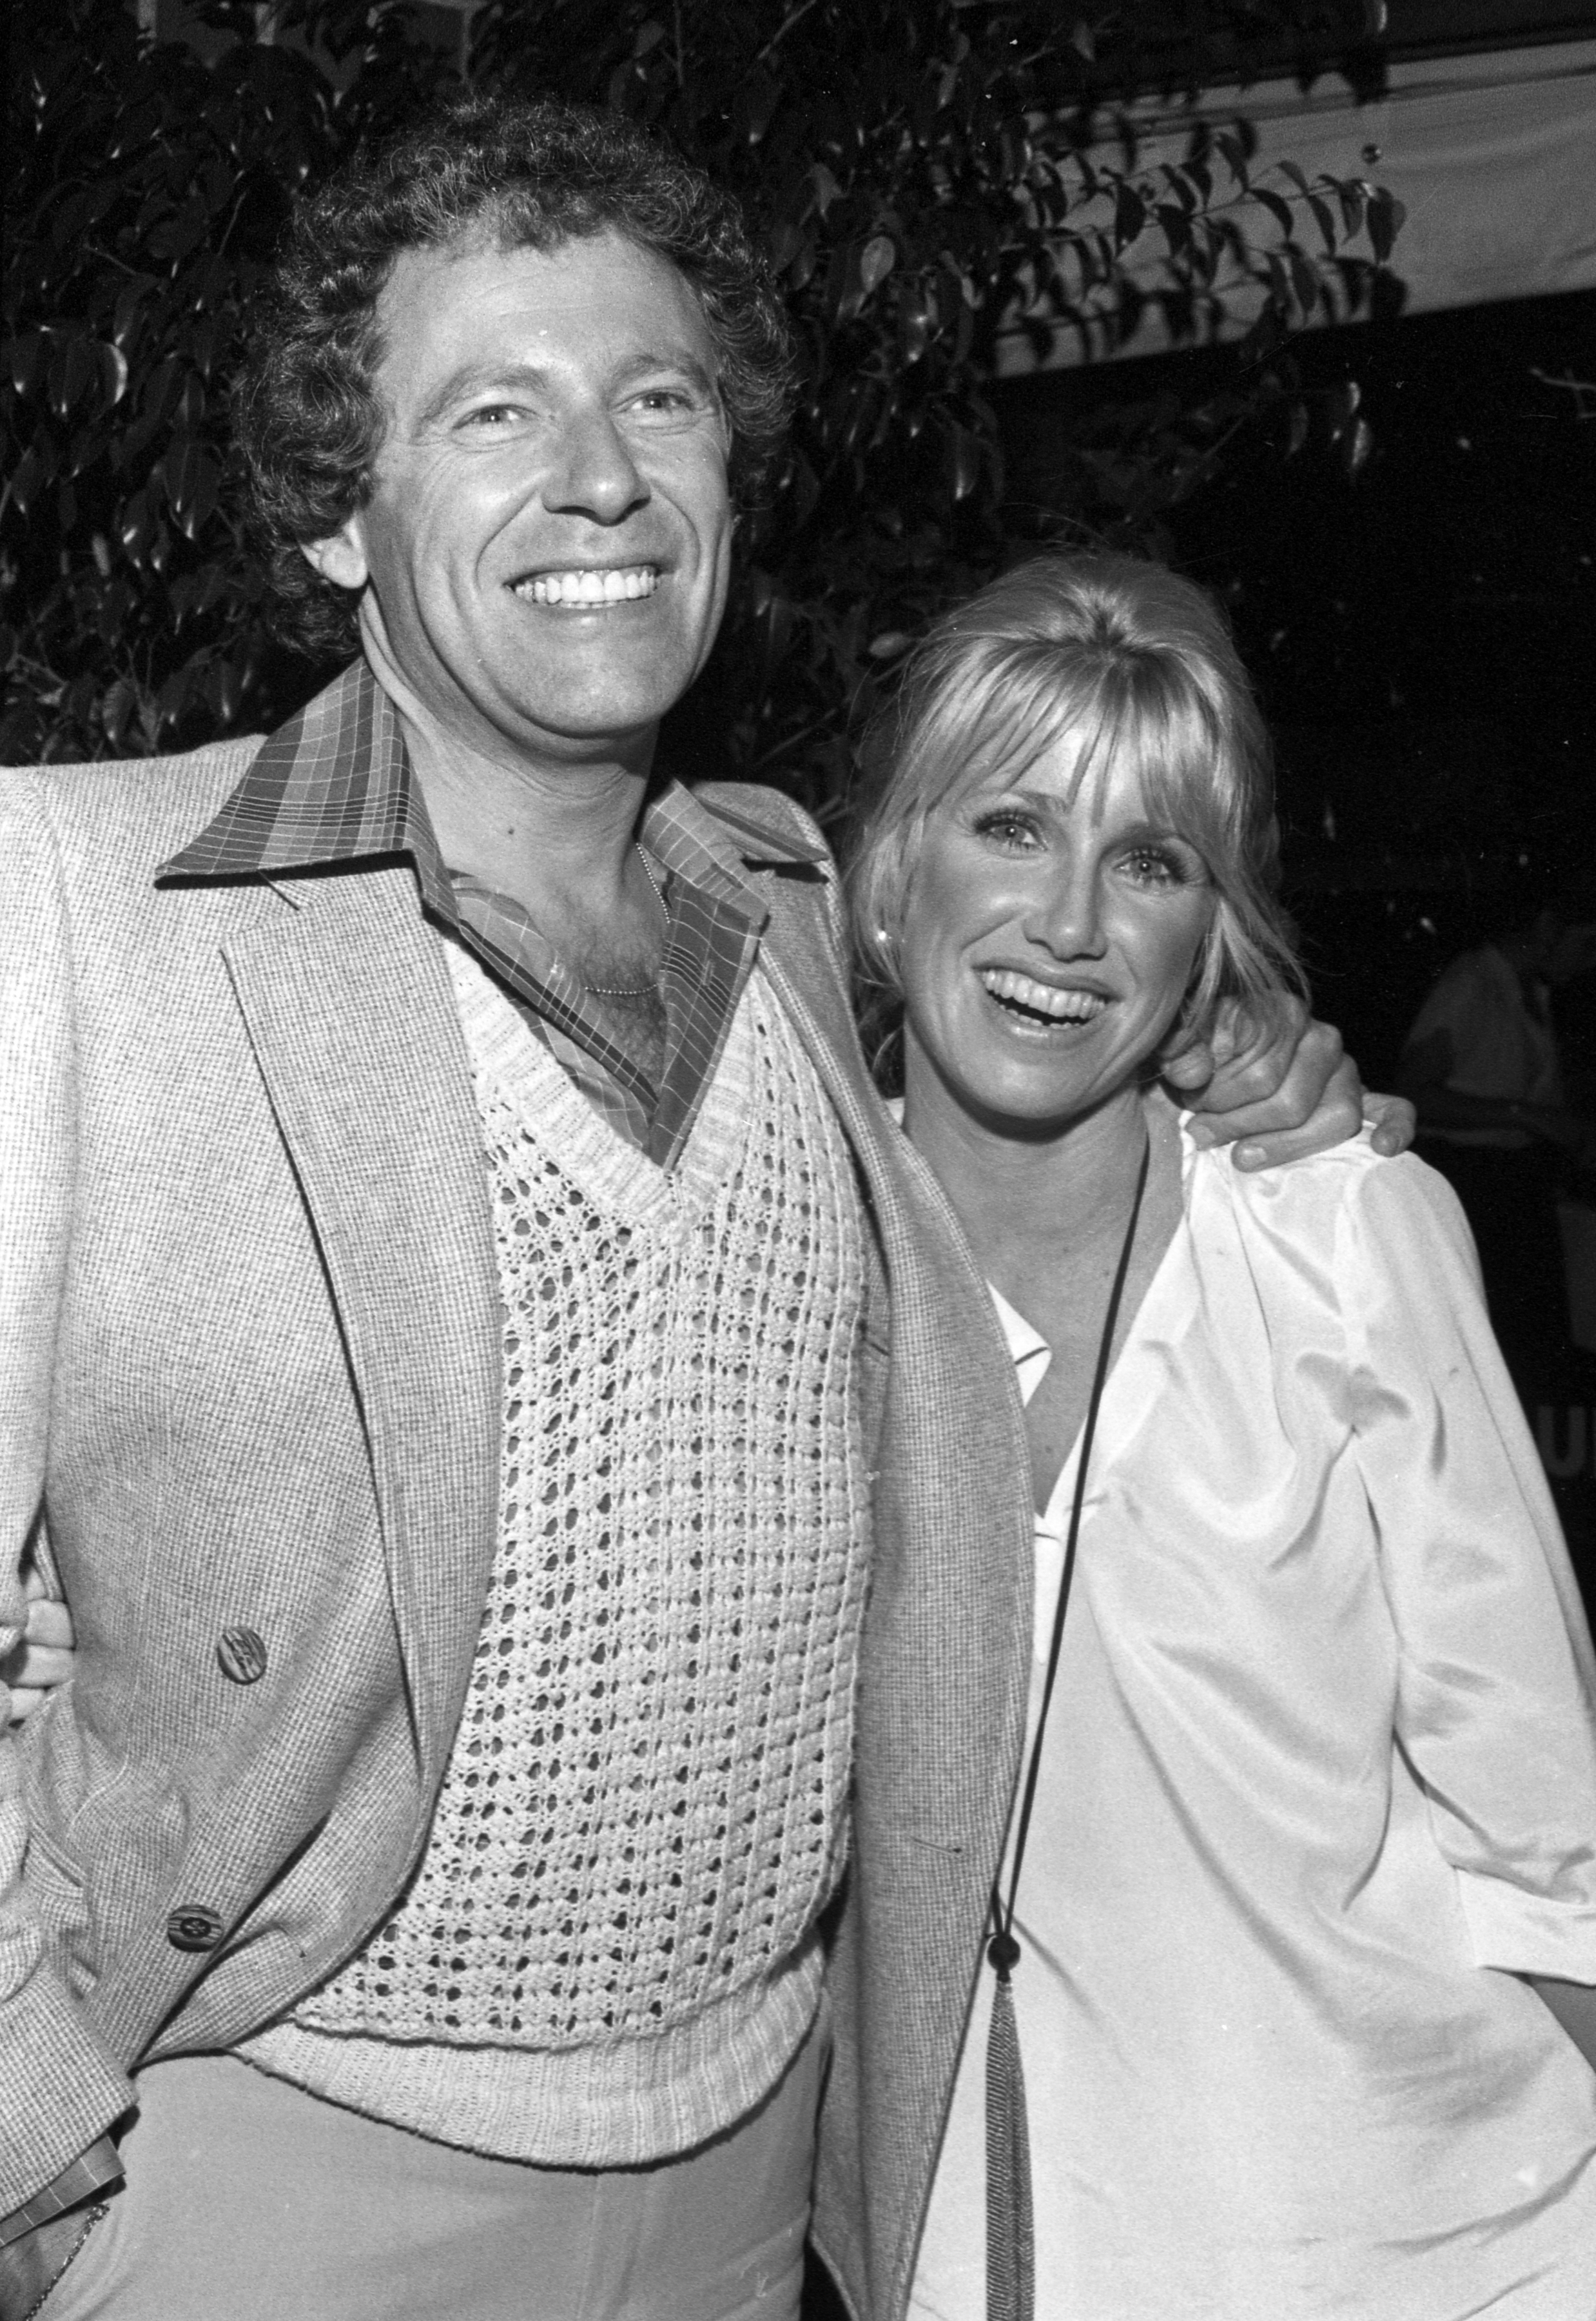 Alan Hamel and Suzanne Somers pictured together in the 1980s | Source: Getty Images